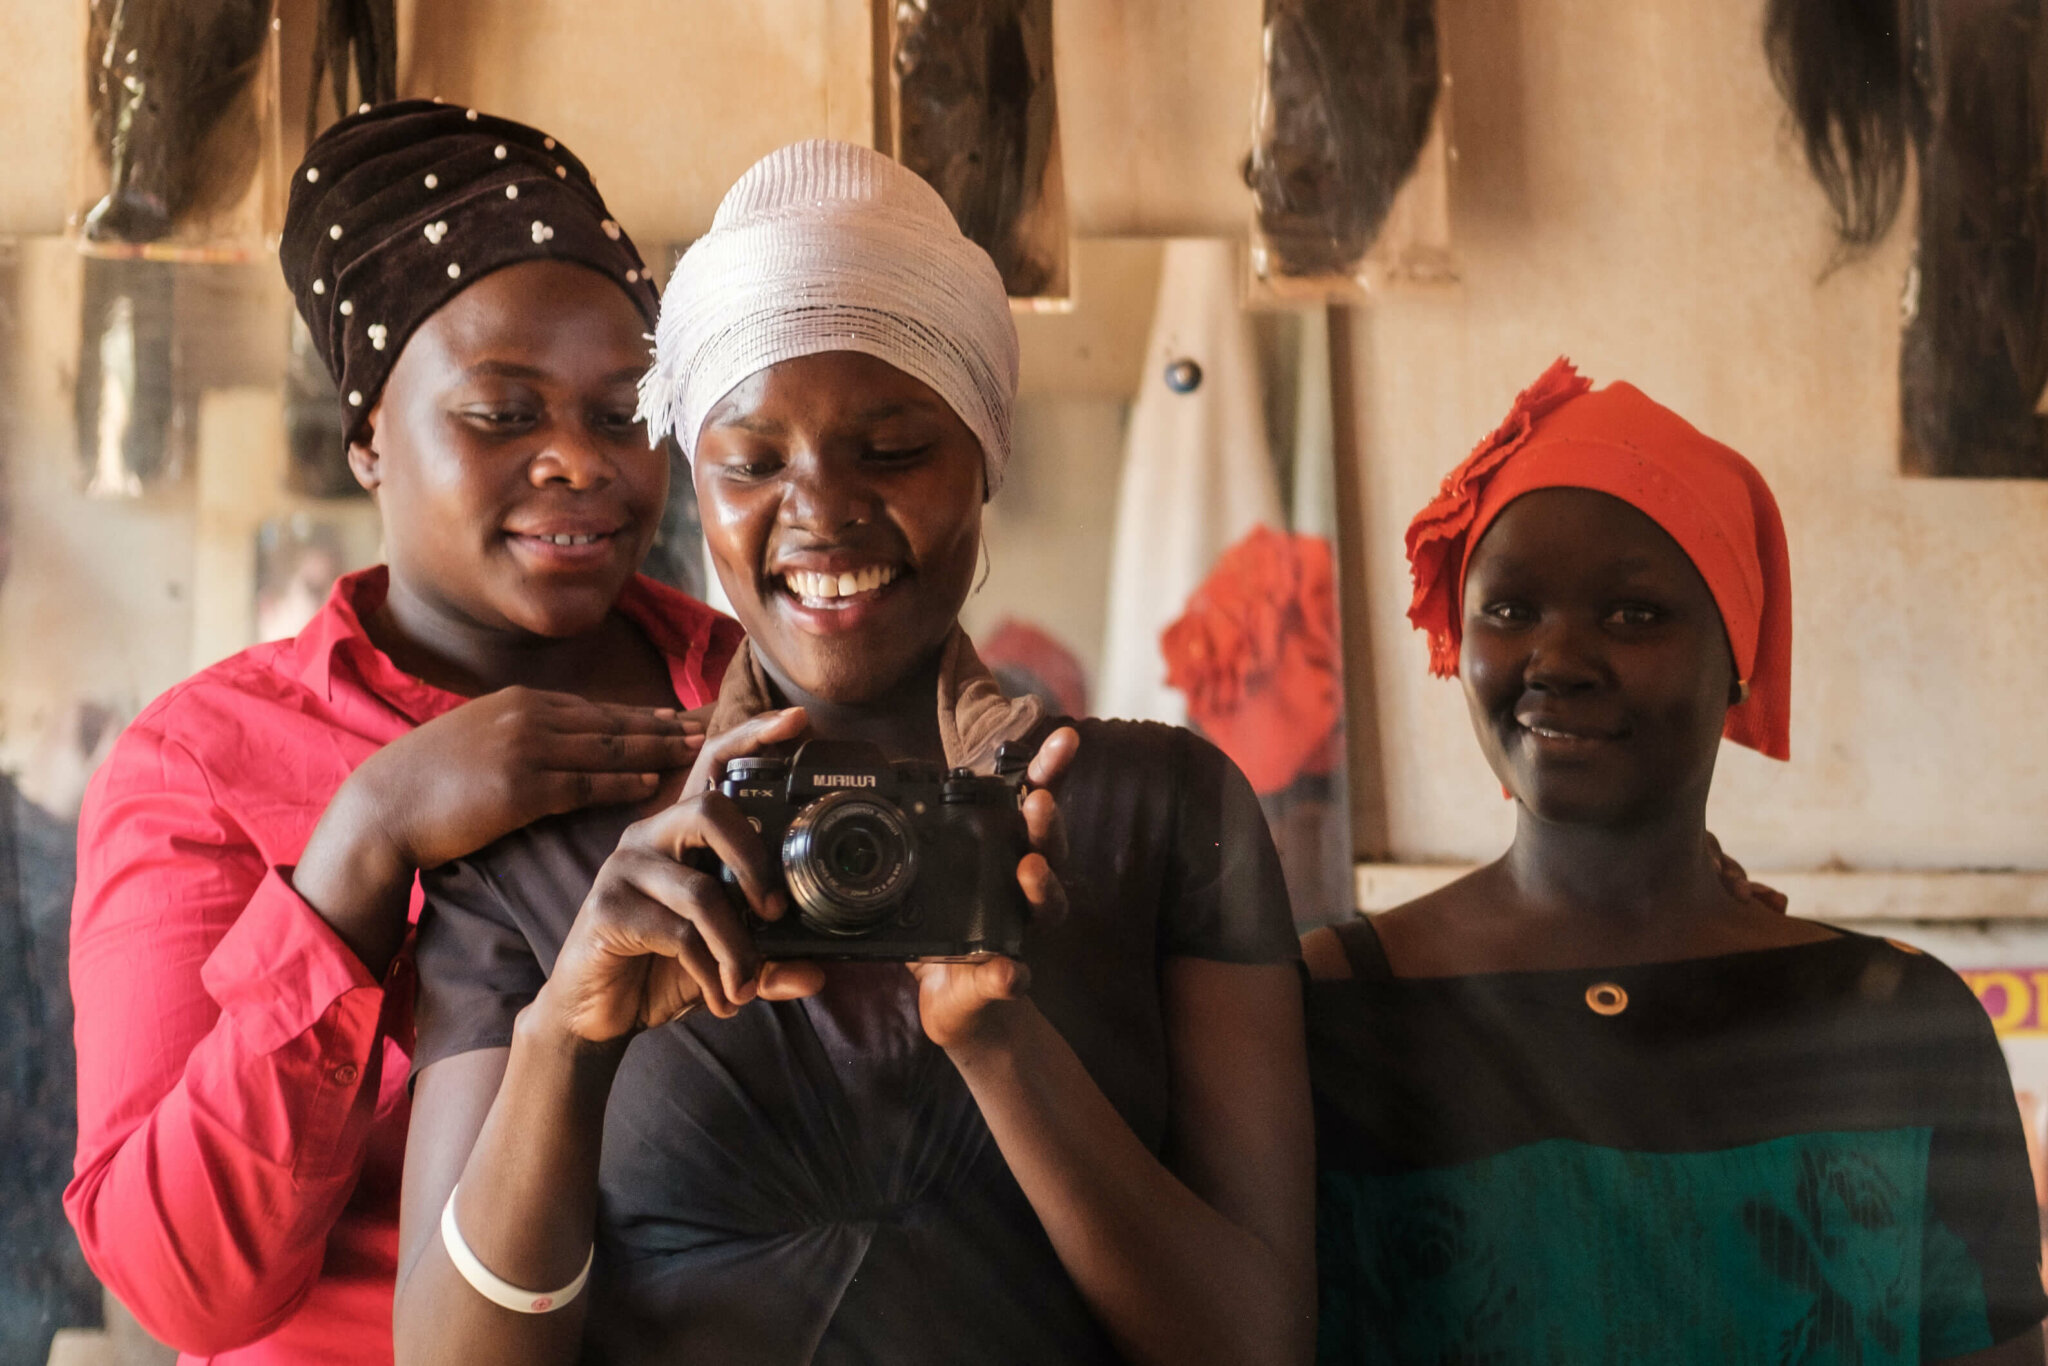 Image of three women who participated in the project: Overcoming Barriers to Food Security: A photo narrative by people with disabilities. The woman in the middle of the three holds a camera.